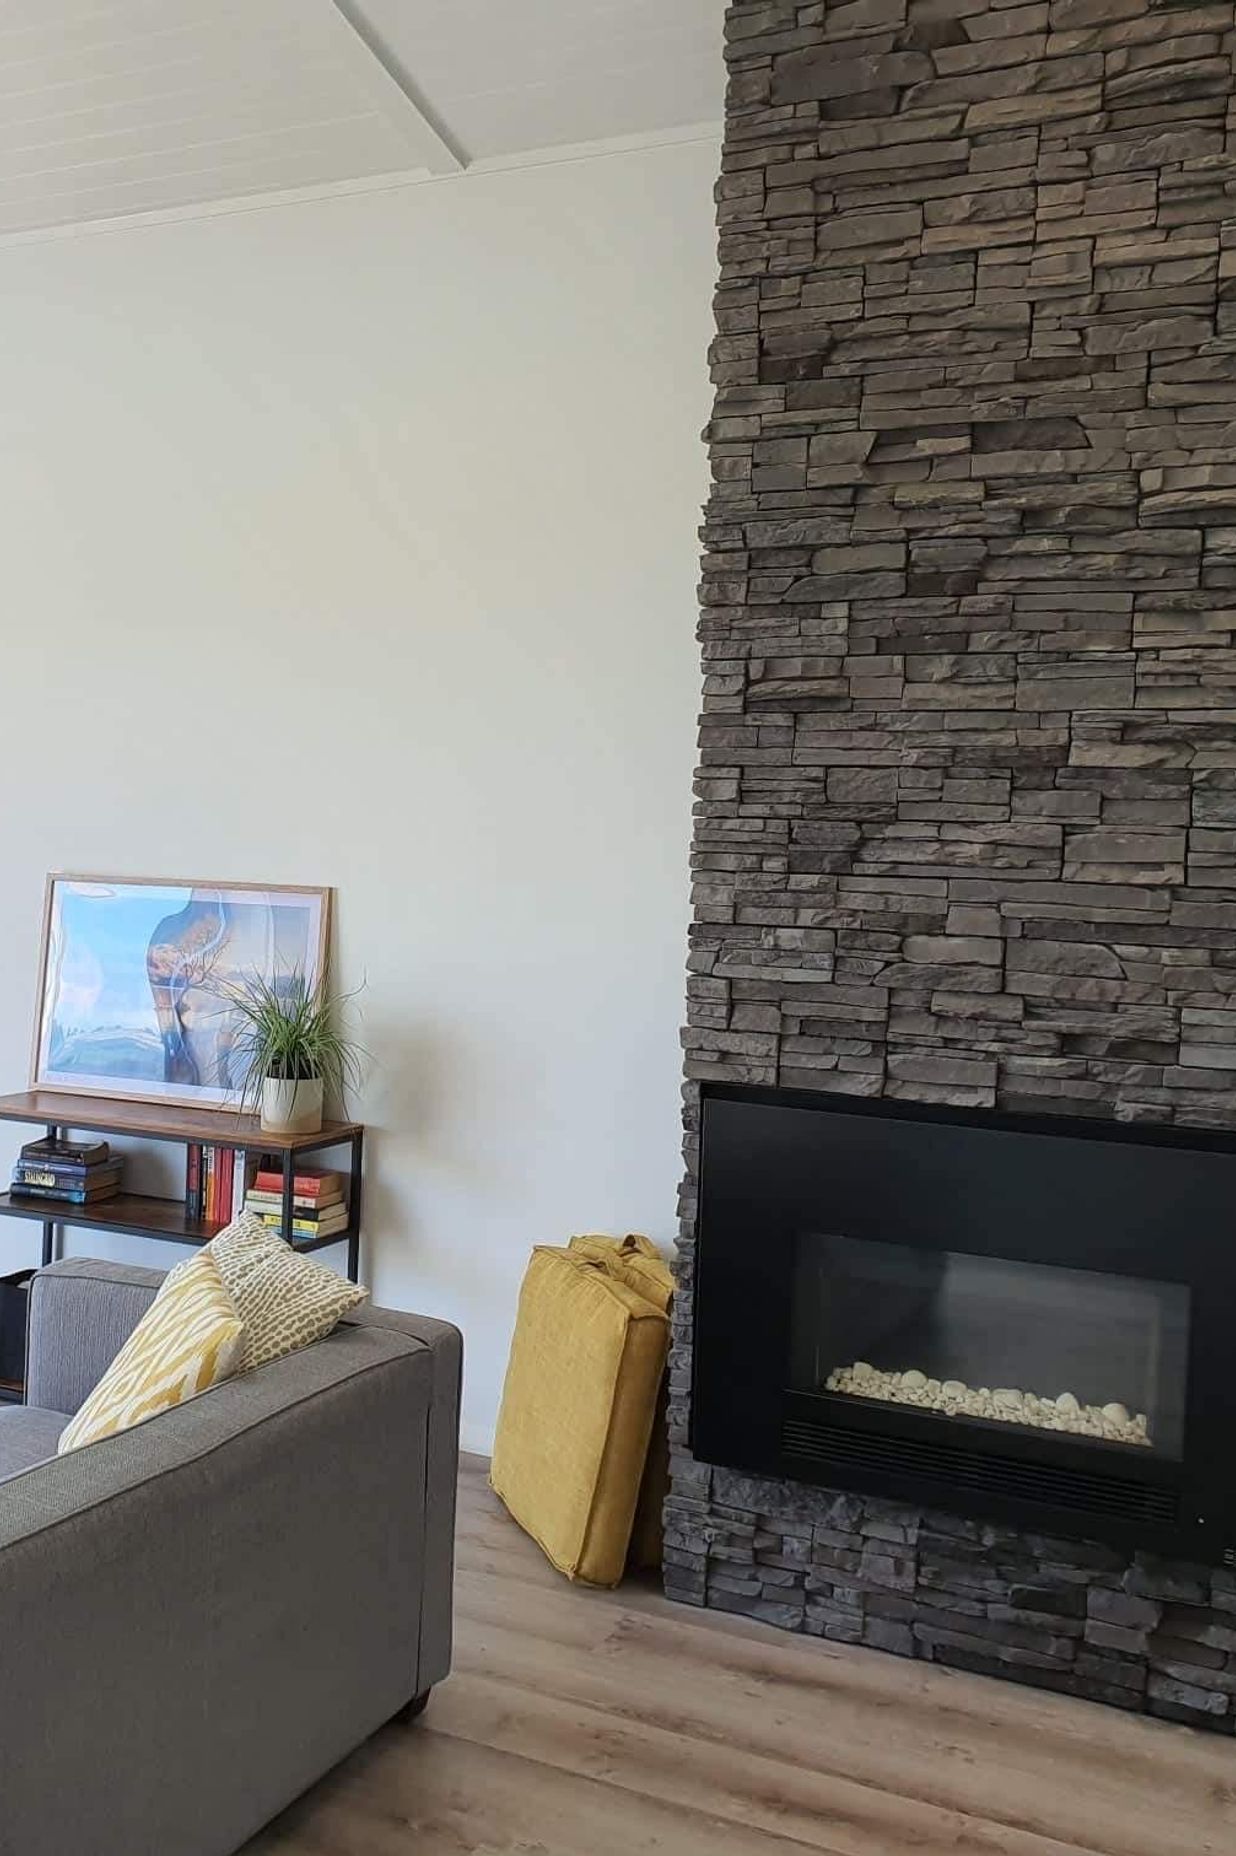 A schist stone fireplace adds a ‘wow-factor’ to the space.